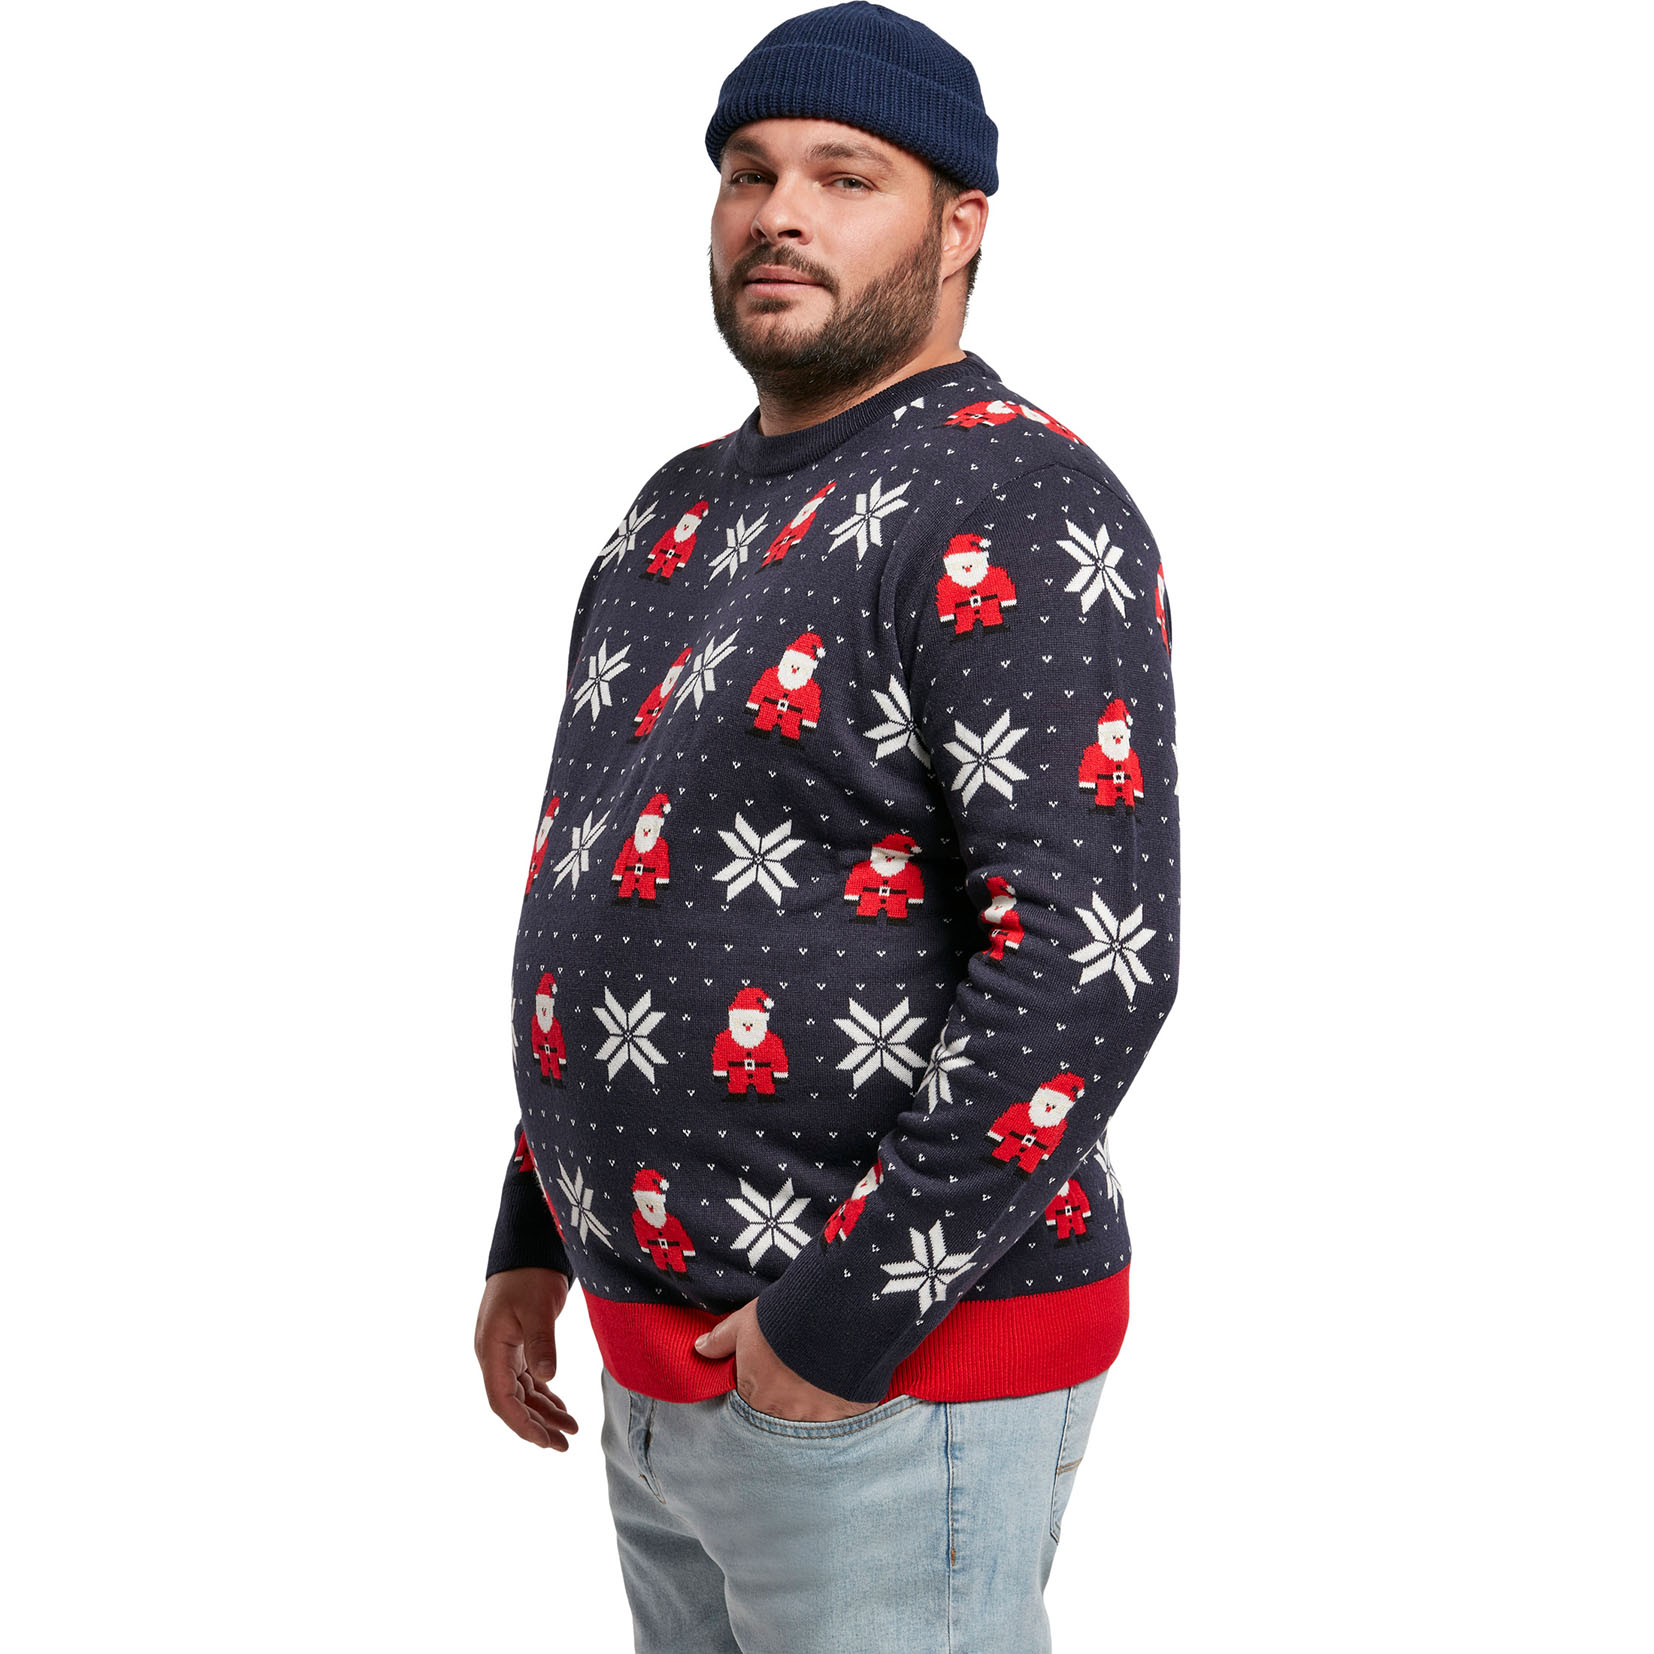 Urban Classics Sweater Nicolaus and Snowflakes (blue)